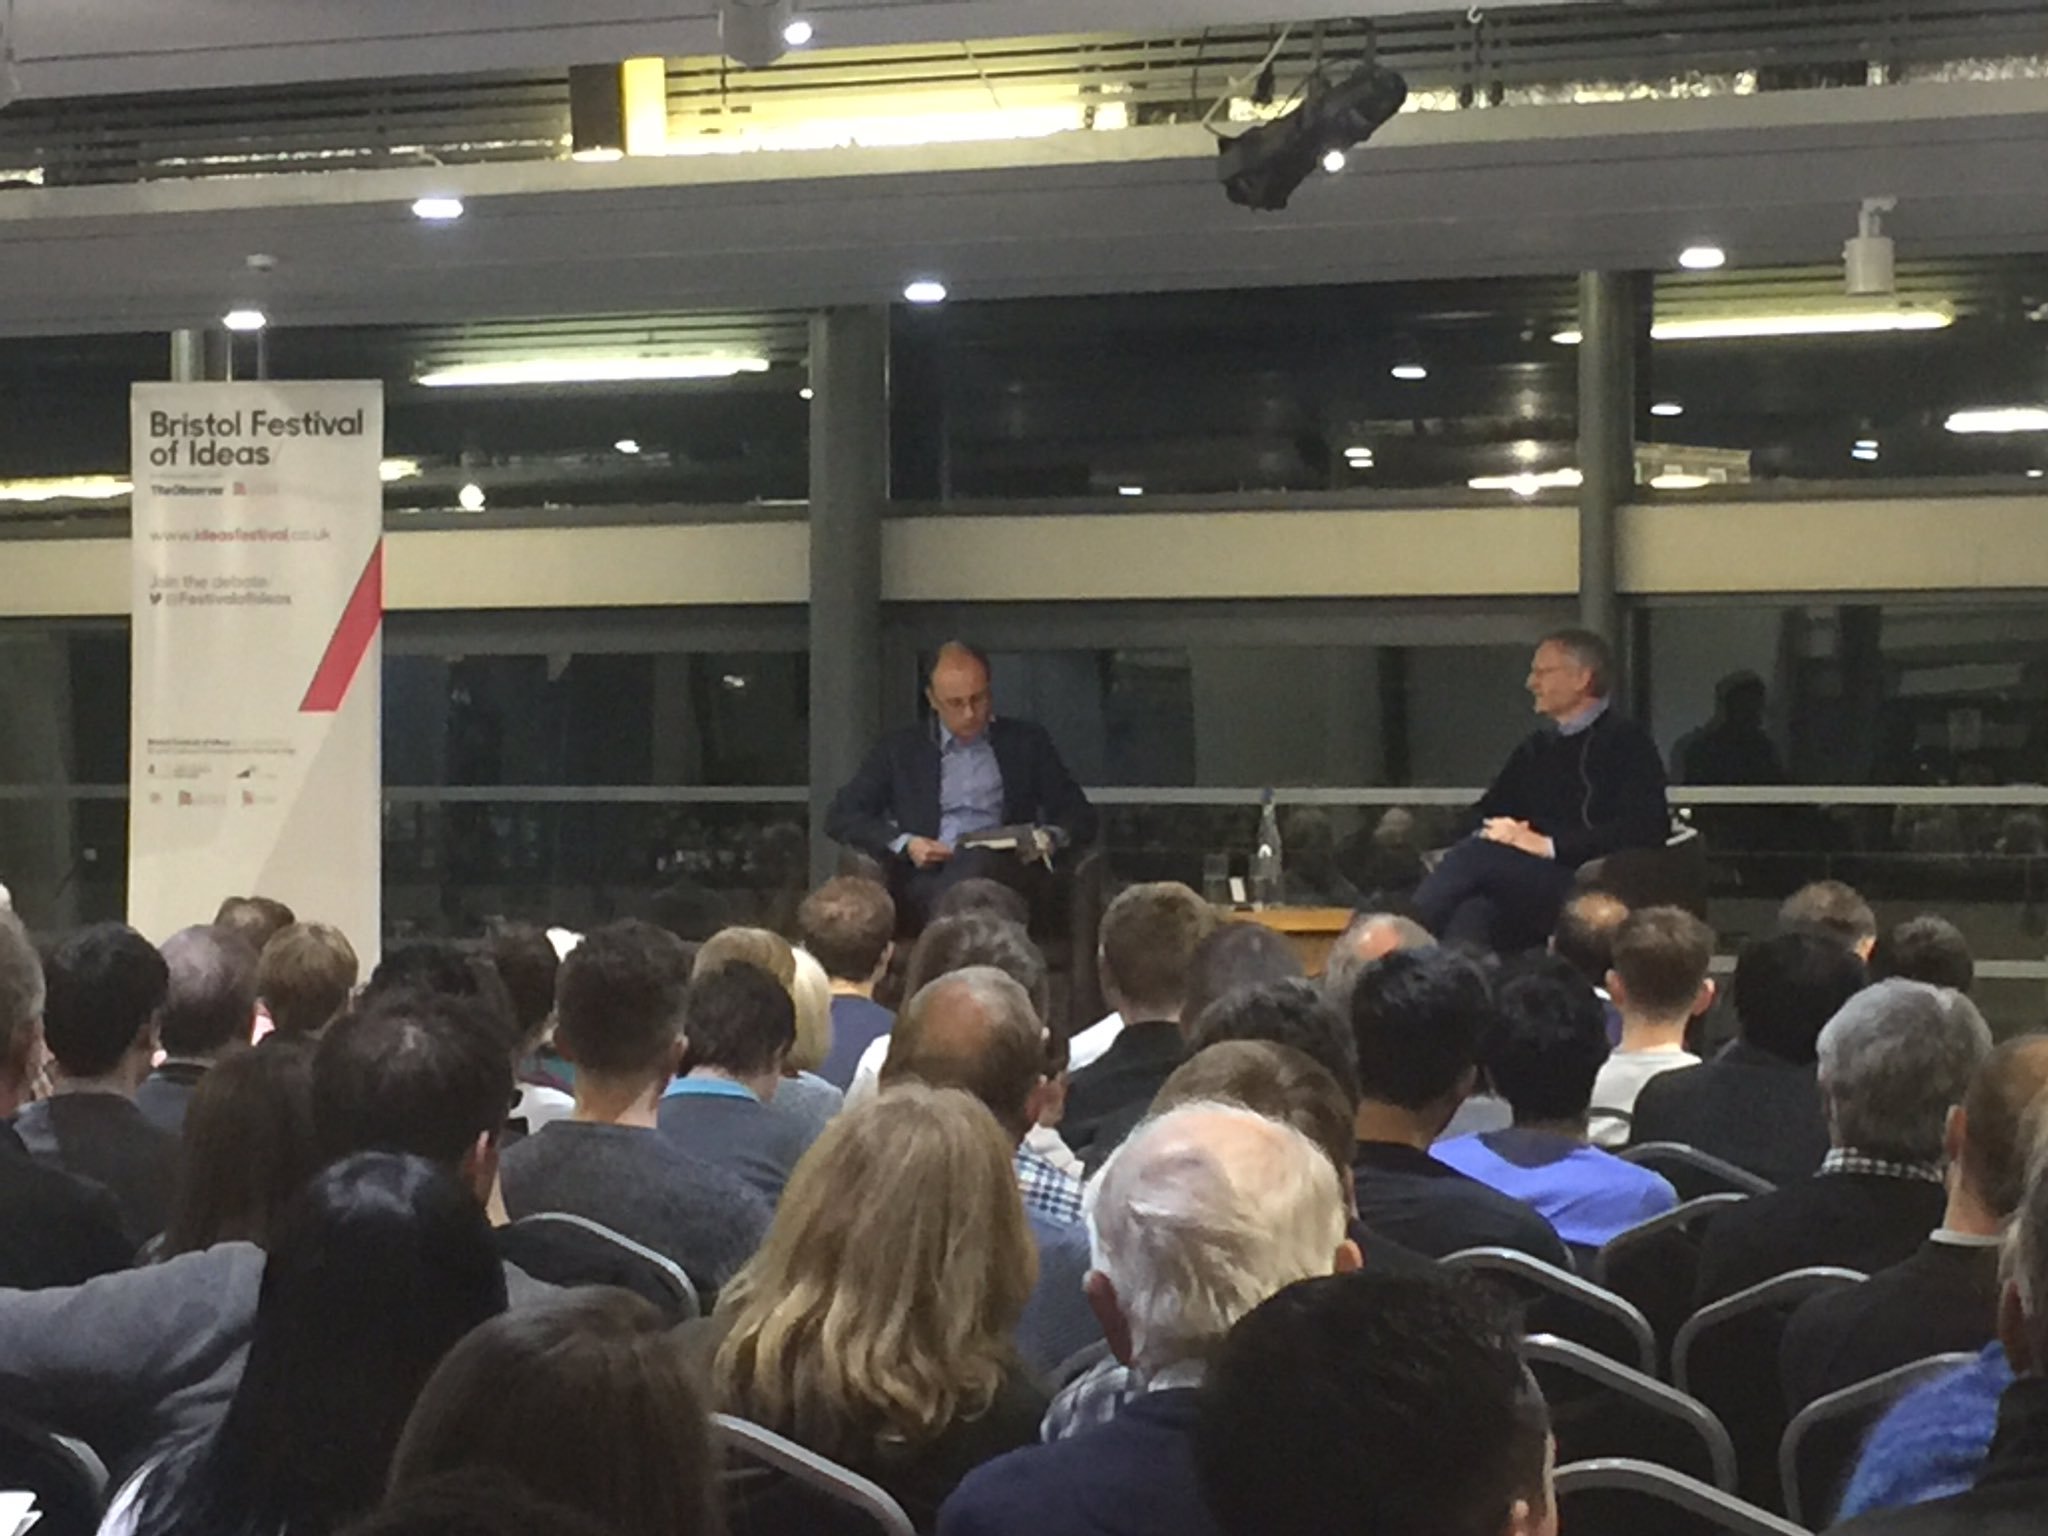 Chris Giles @ChrisGiles_ talking with @rodrikdani in #economicsfest tonight to a packed audience. Thanks @economics_net for support. https://t.co/MGP2Yry7QU